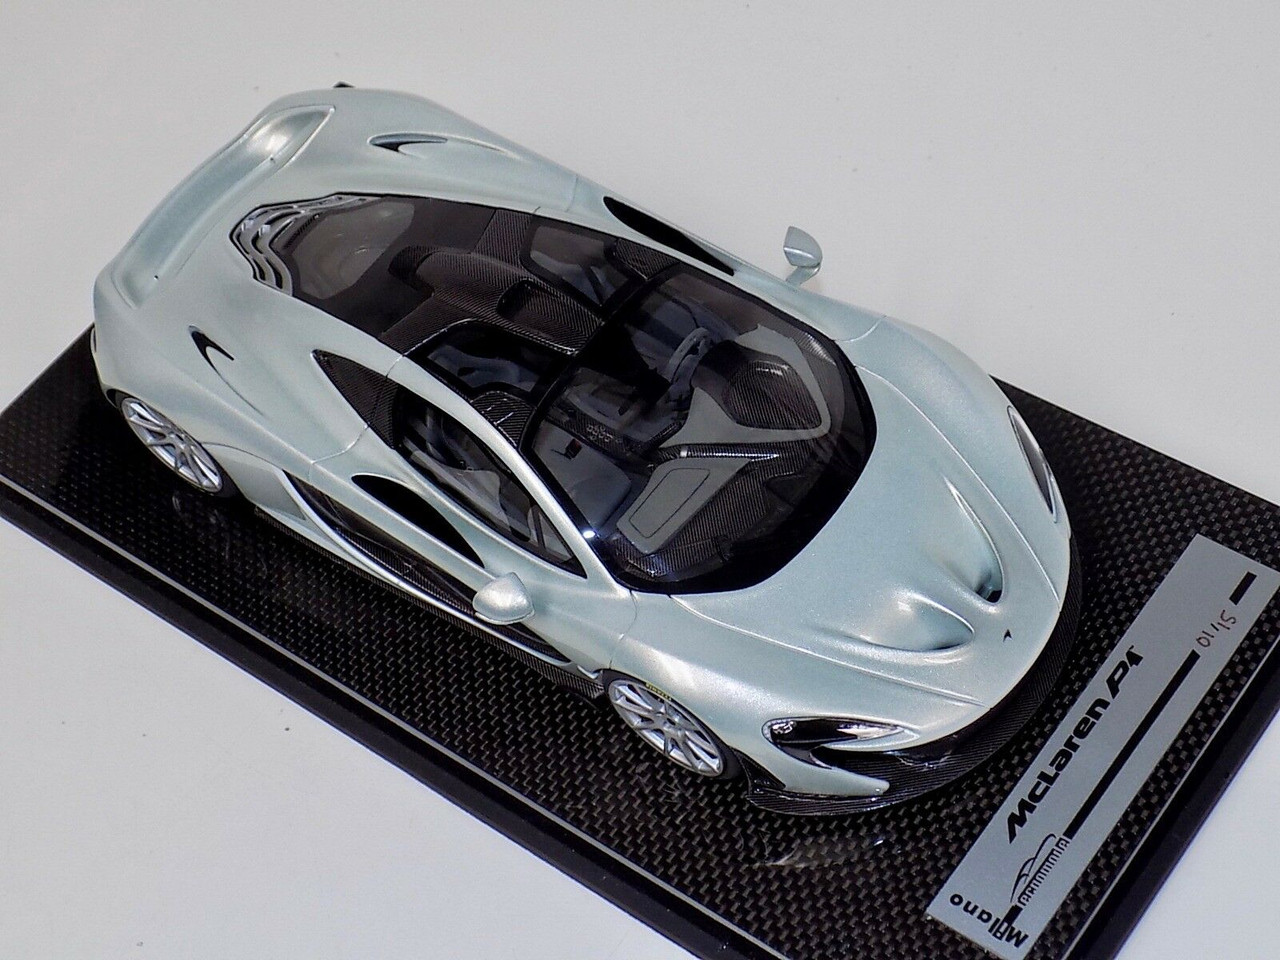 1/18 Tecnomodel McLaren P1 (Ice Silver with Silver wheels) with Carbon Base Resin Car Model Limited 01/15